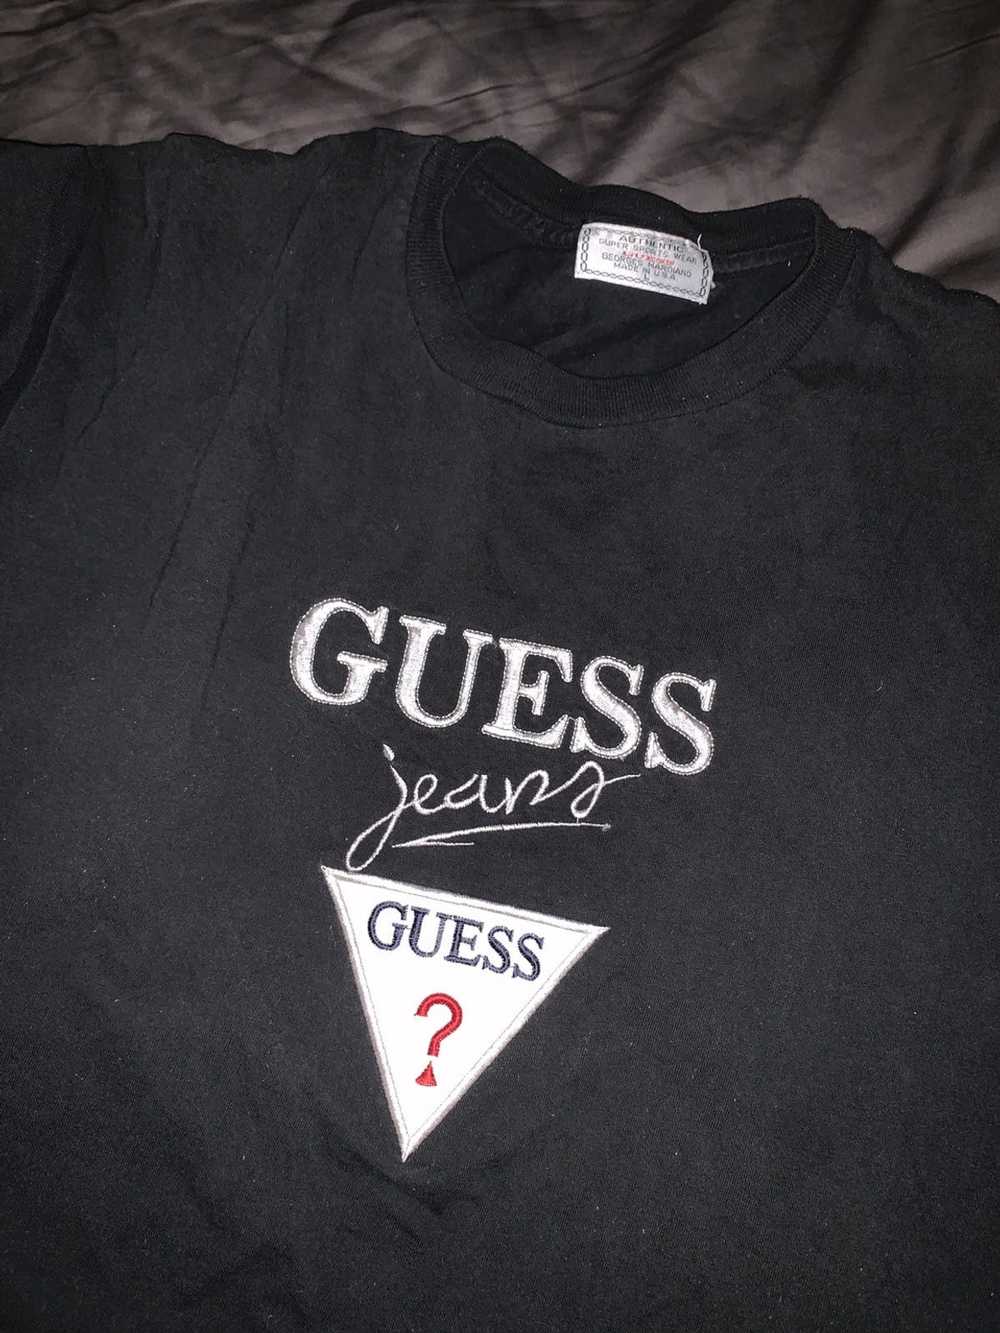 Guess Guess Jeans Vintage tee - image 2